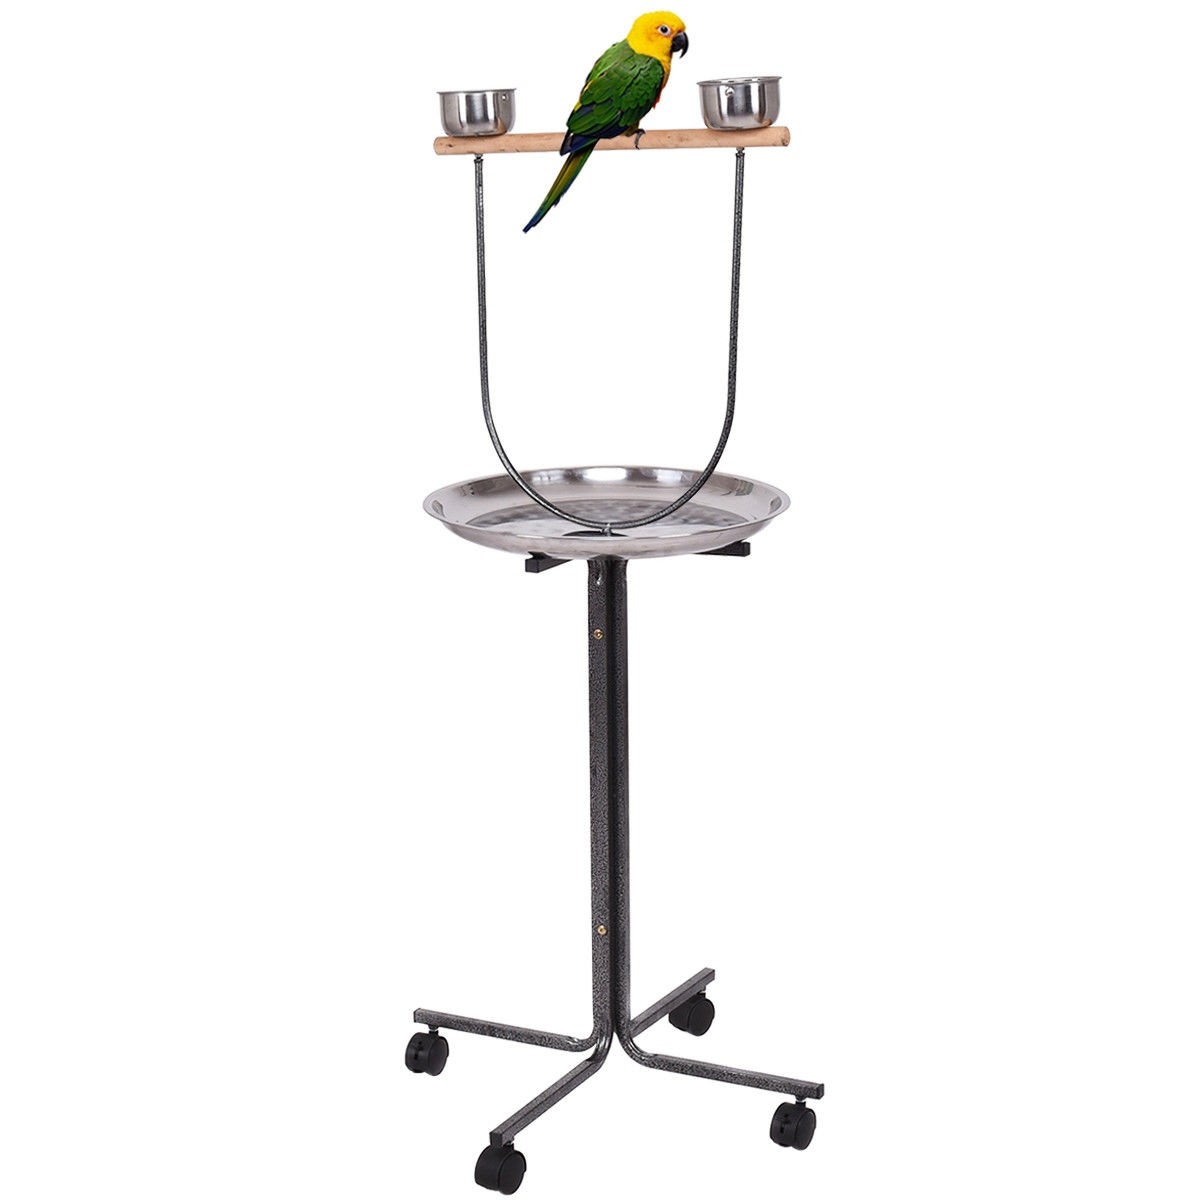 51In. Bird Parrot Play Stand Perch with Pan Feeding Cups